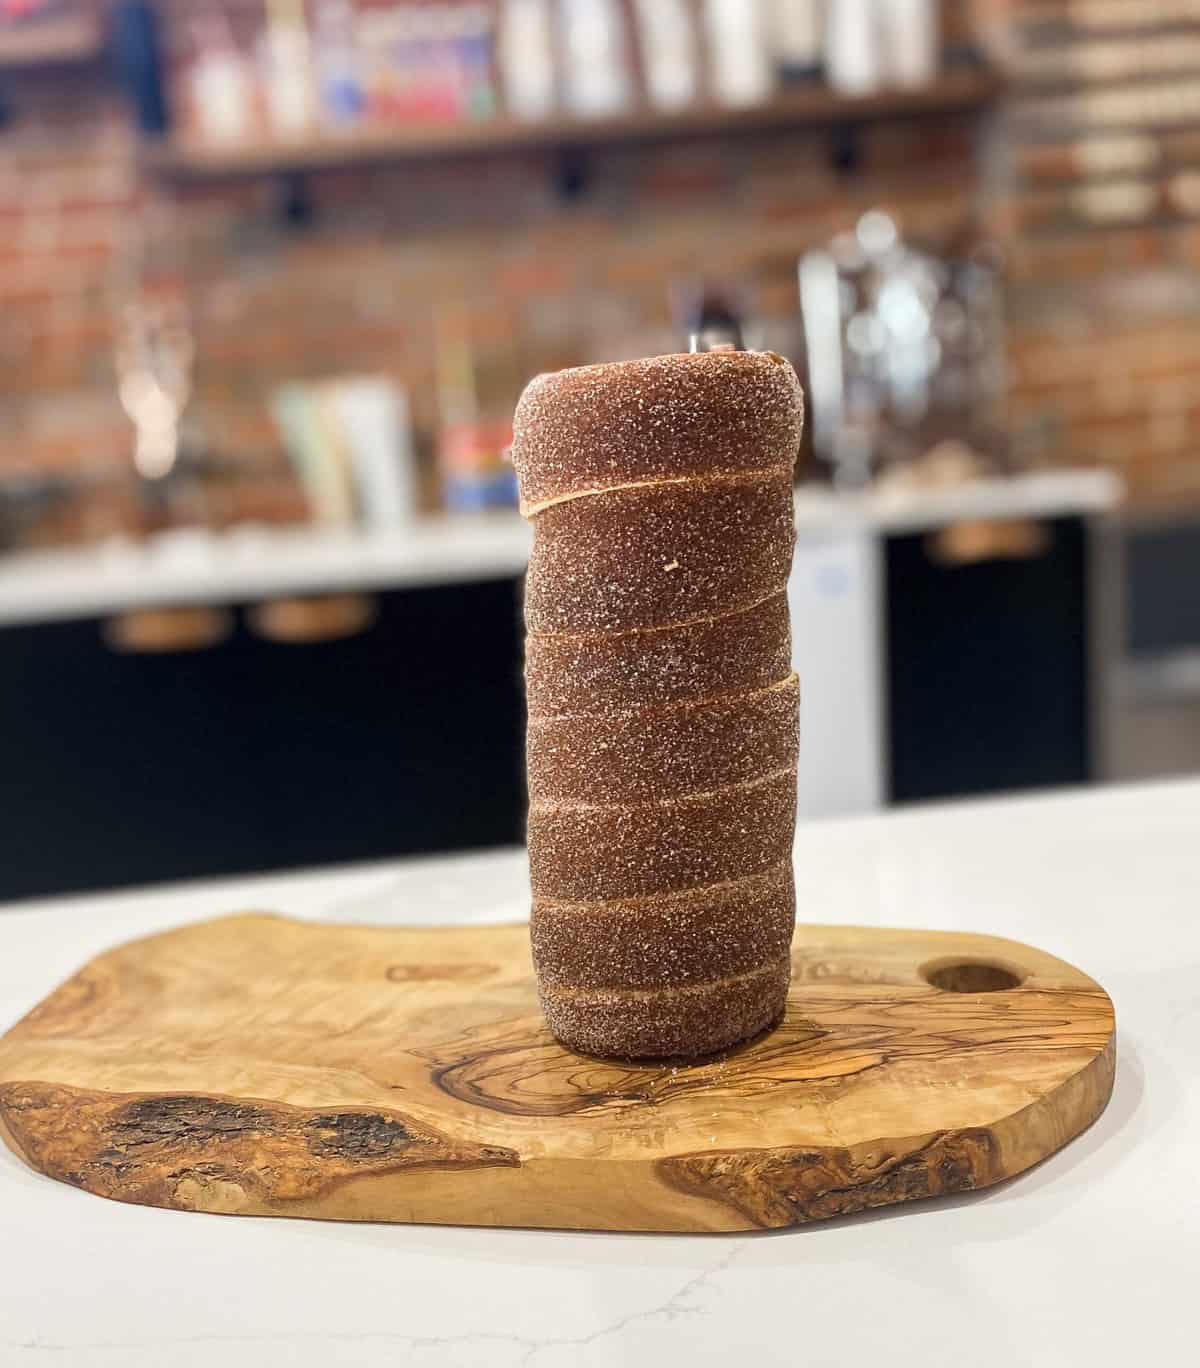 Spiral shaped cone of baked pastry on wood board.